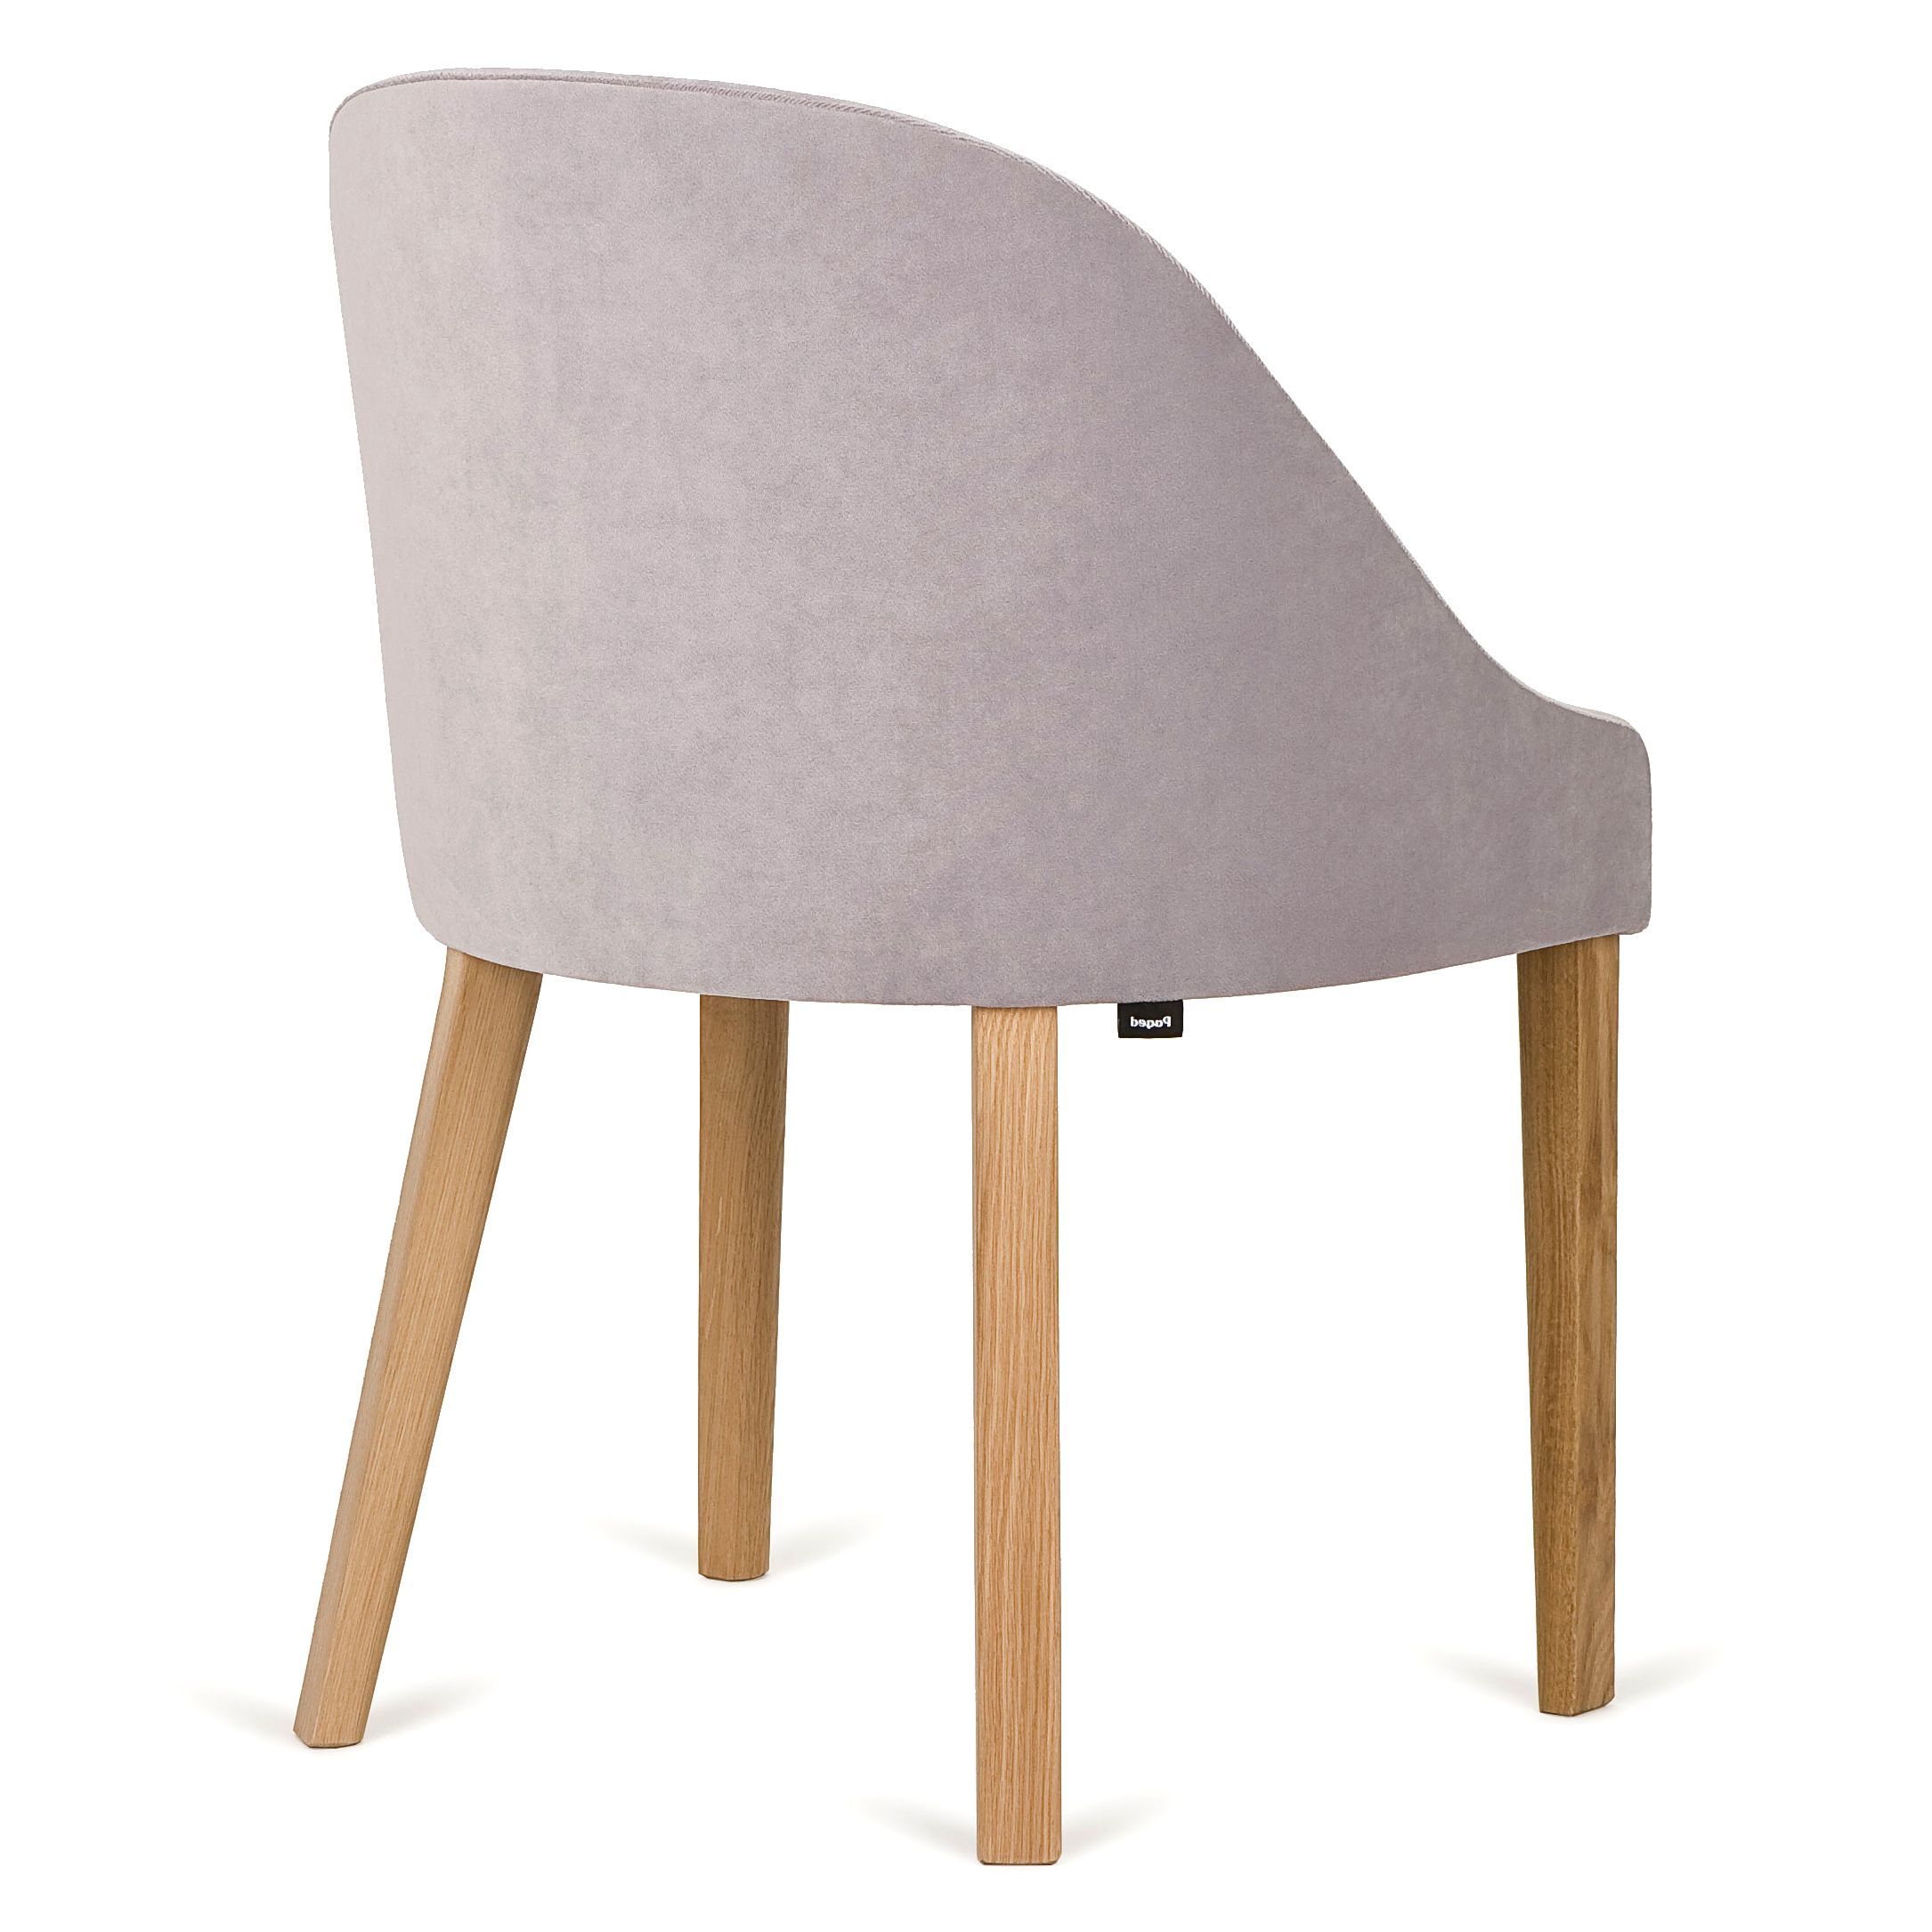 Chair B-5005 LUBI by Paged